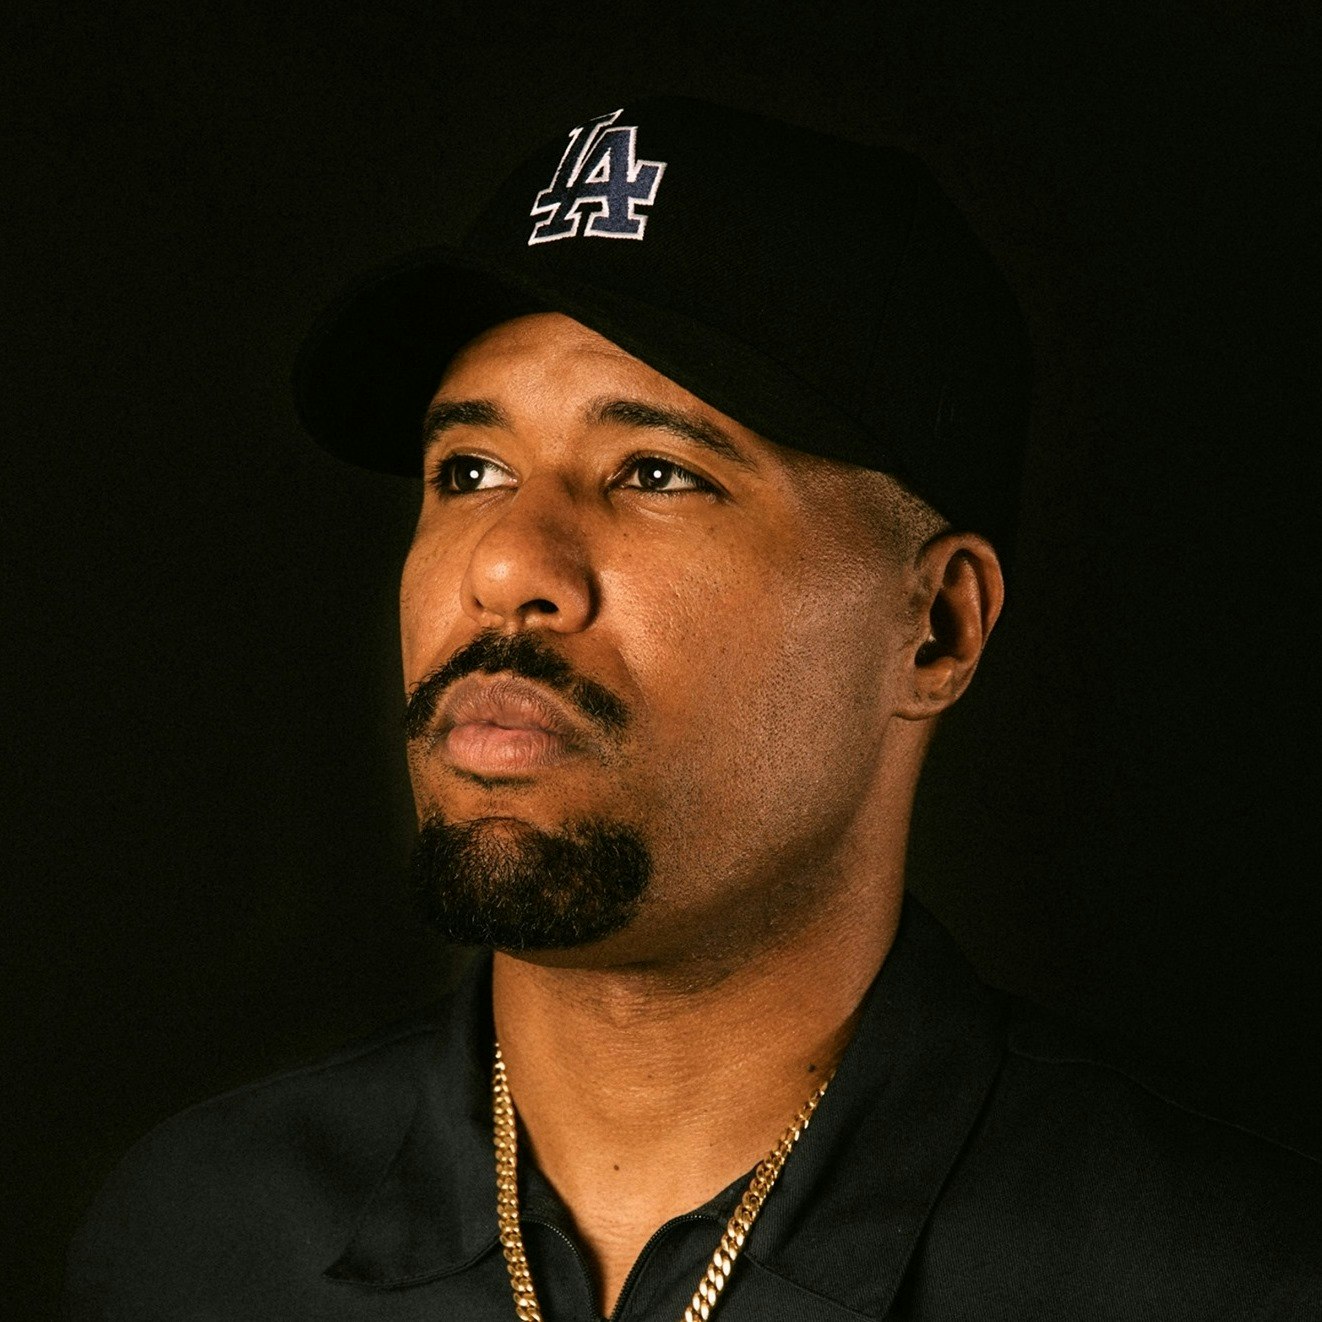 Dom Kennedy finds himself in “Deep Thought” in latest video - REVOLT